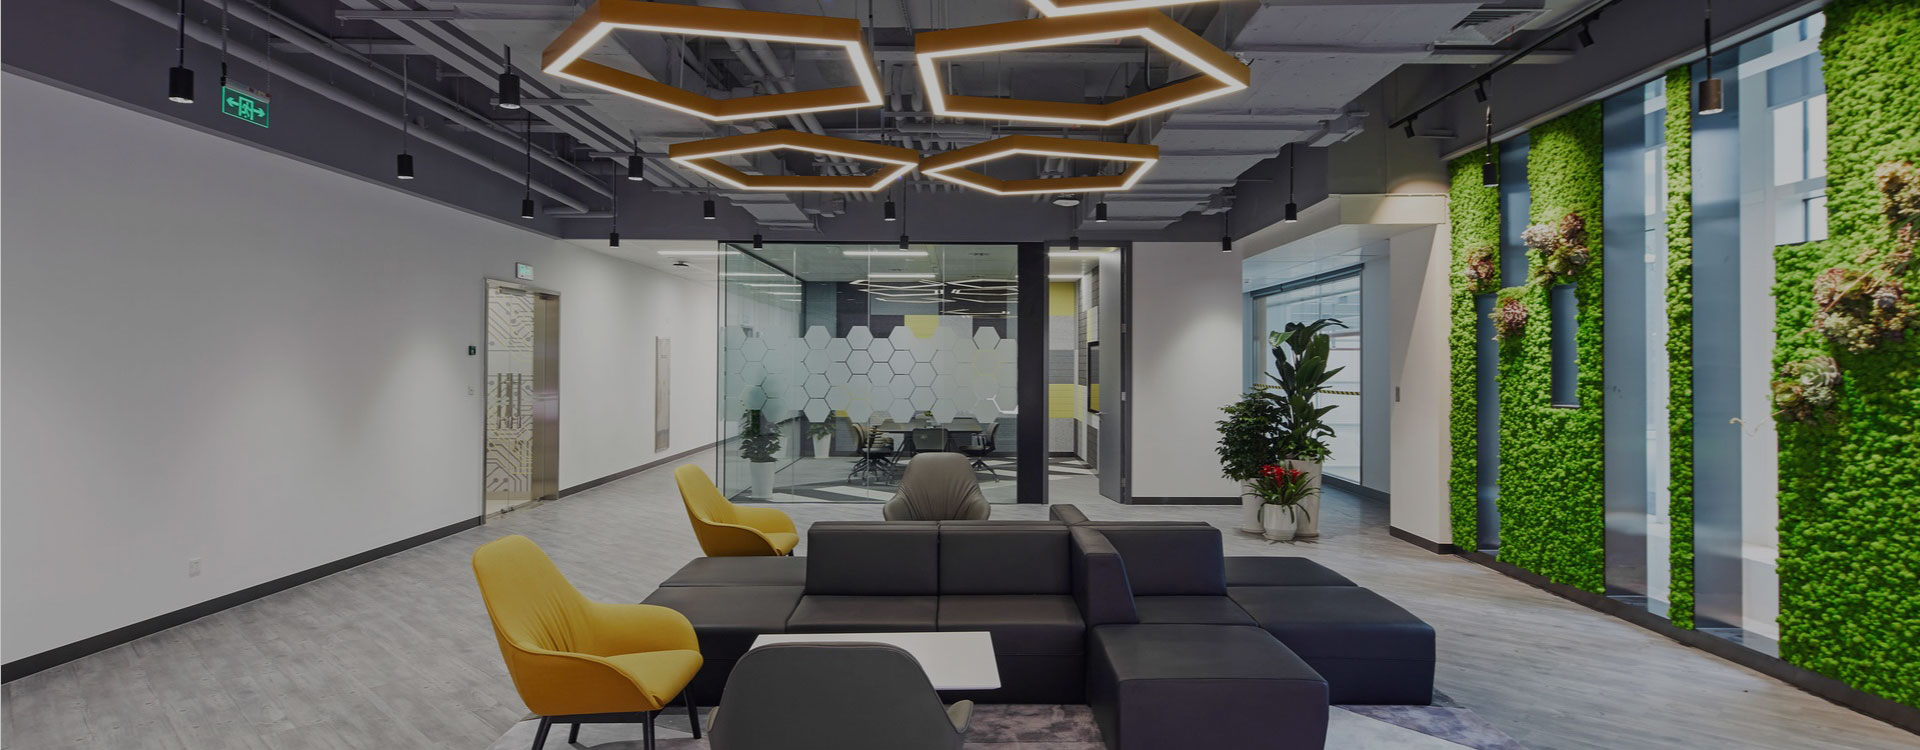 The Four W’s Of Commercial Interior Design – What, Why, When, Where?